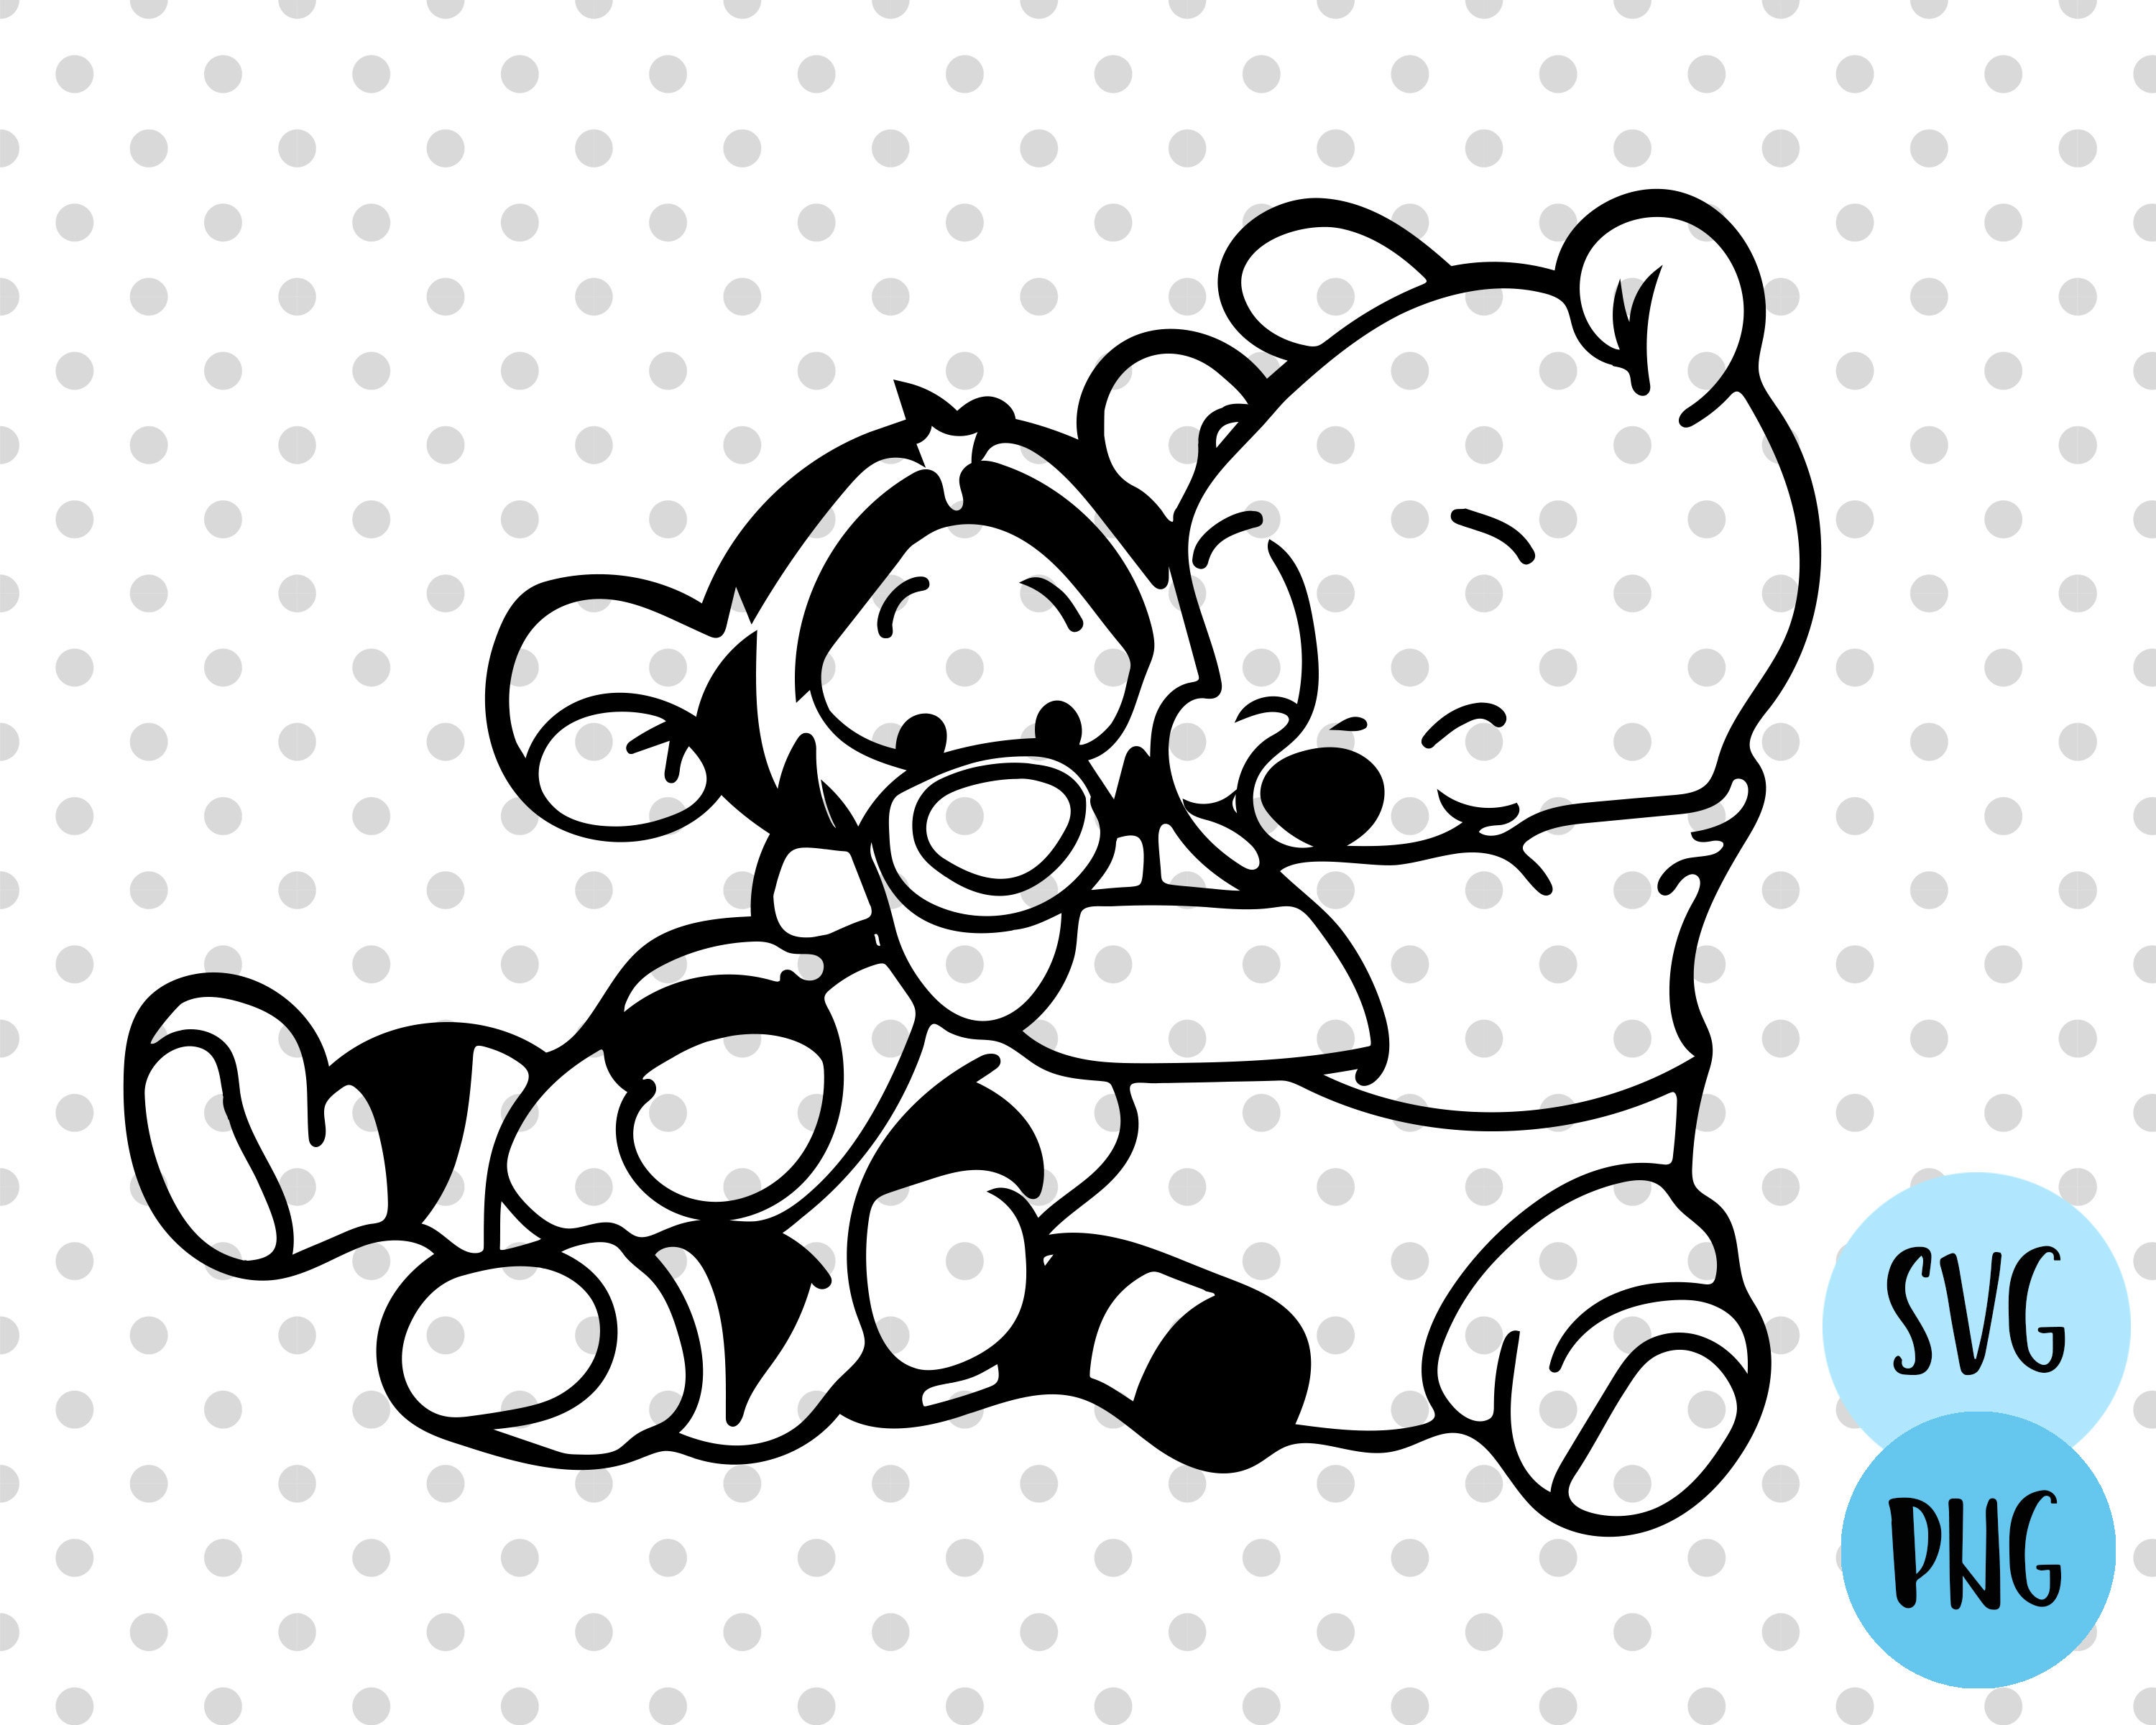 Baby Winnie The Pooh Characters SVG